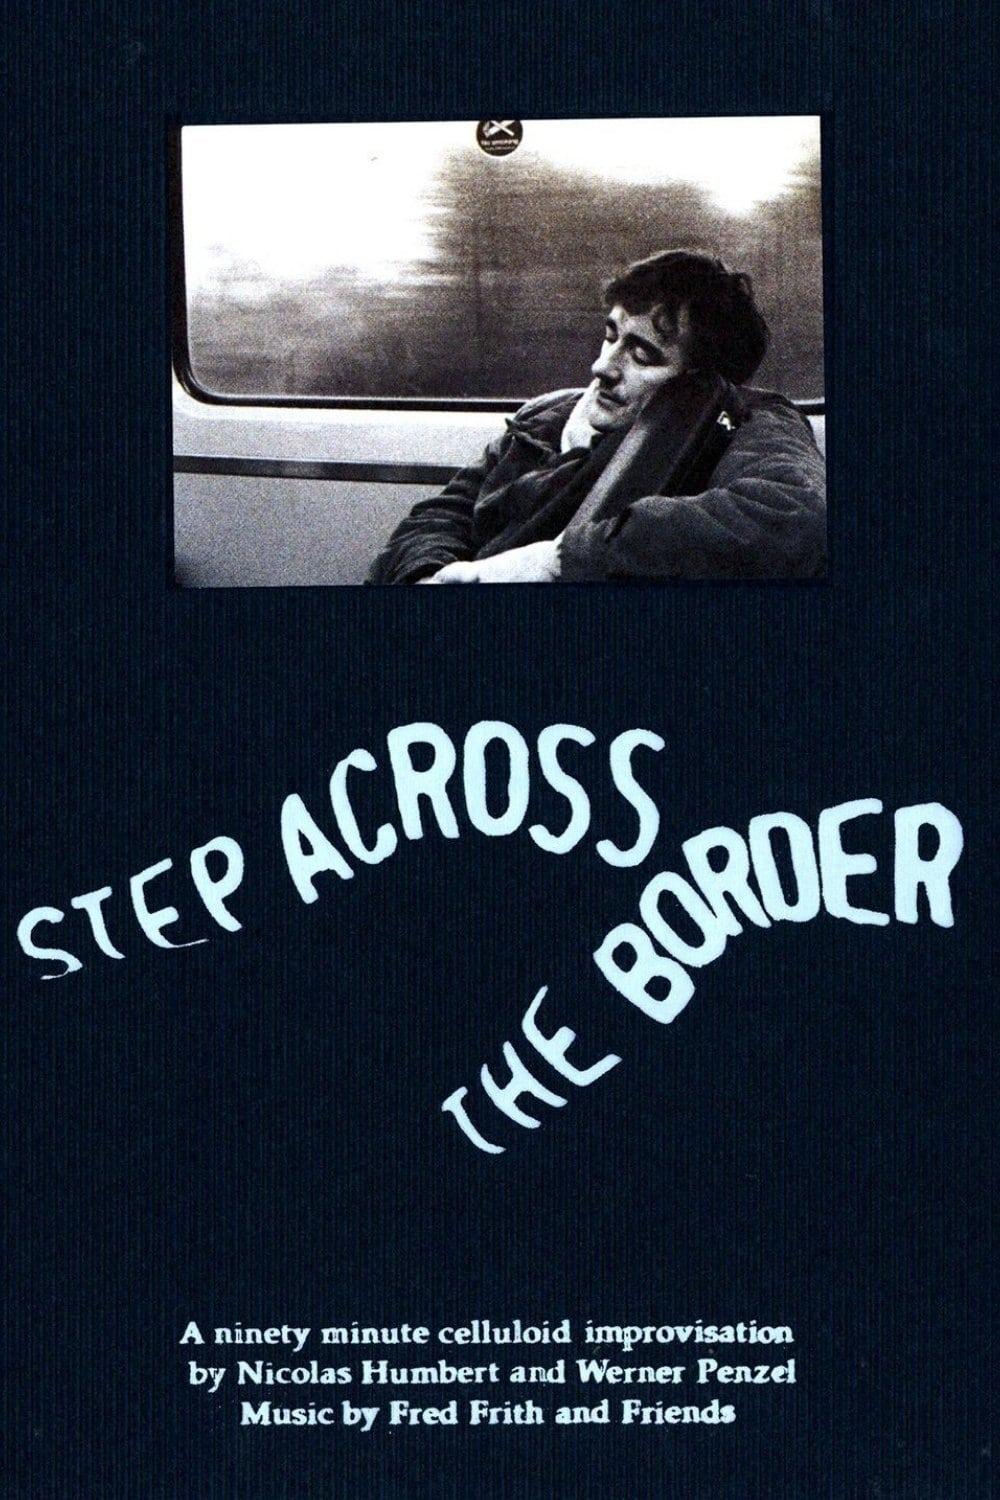 Step Across the Border poster